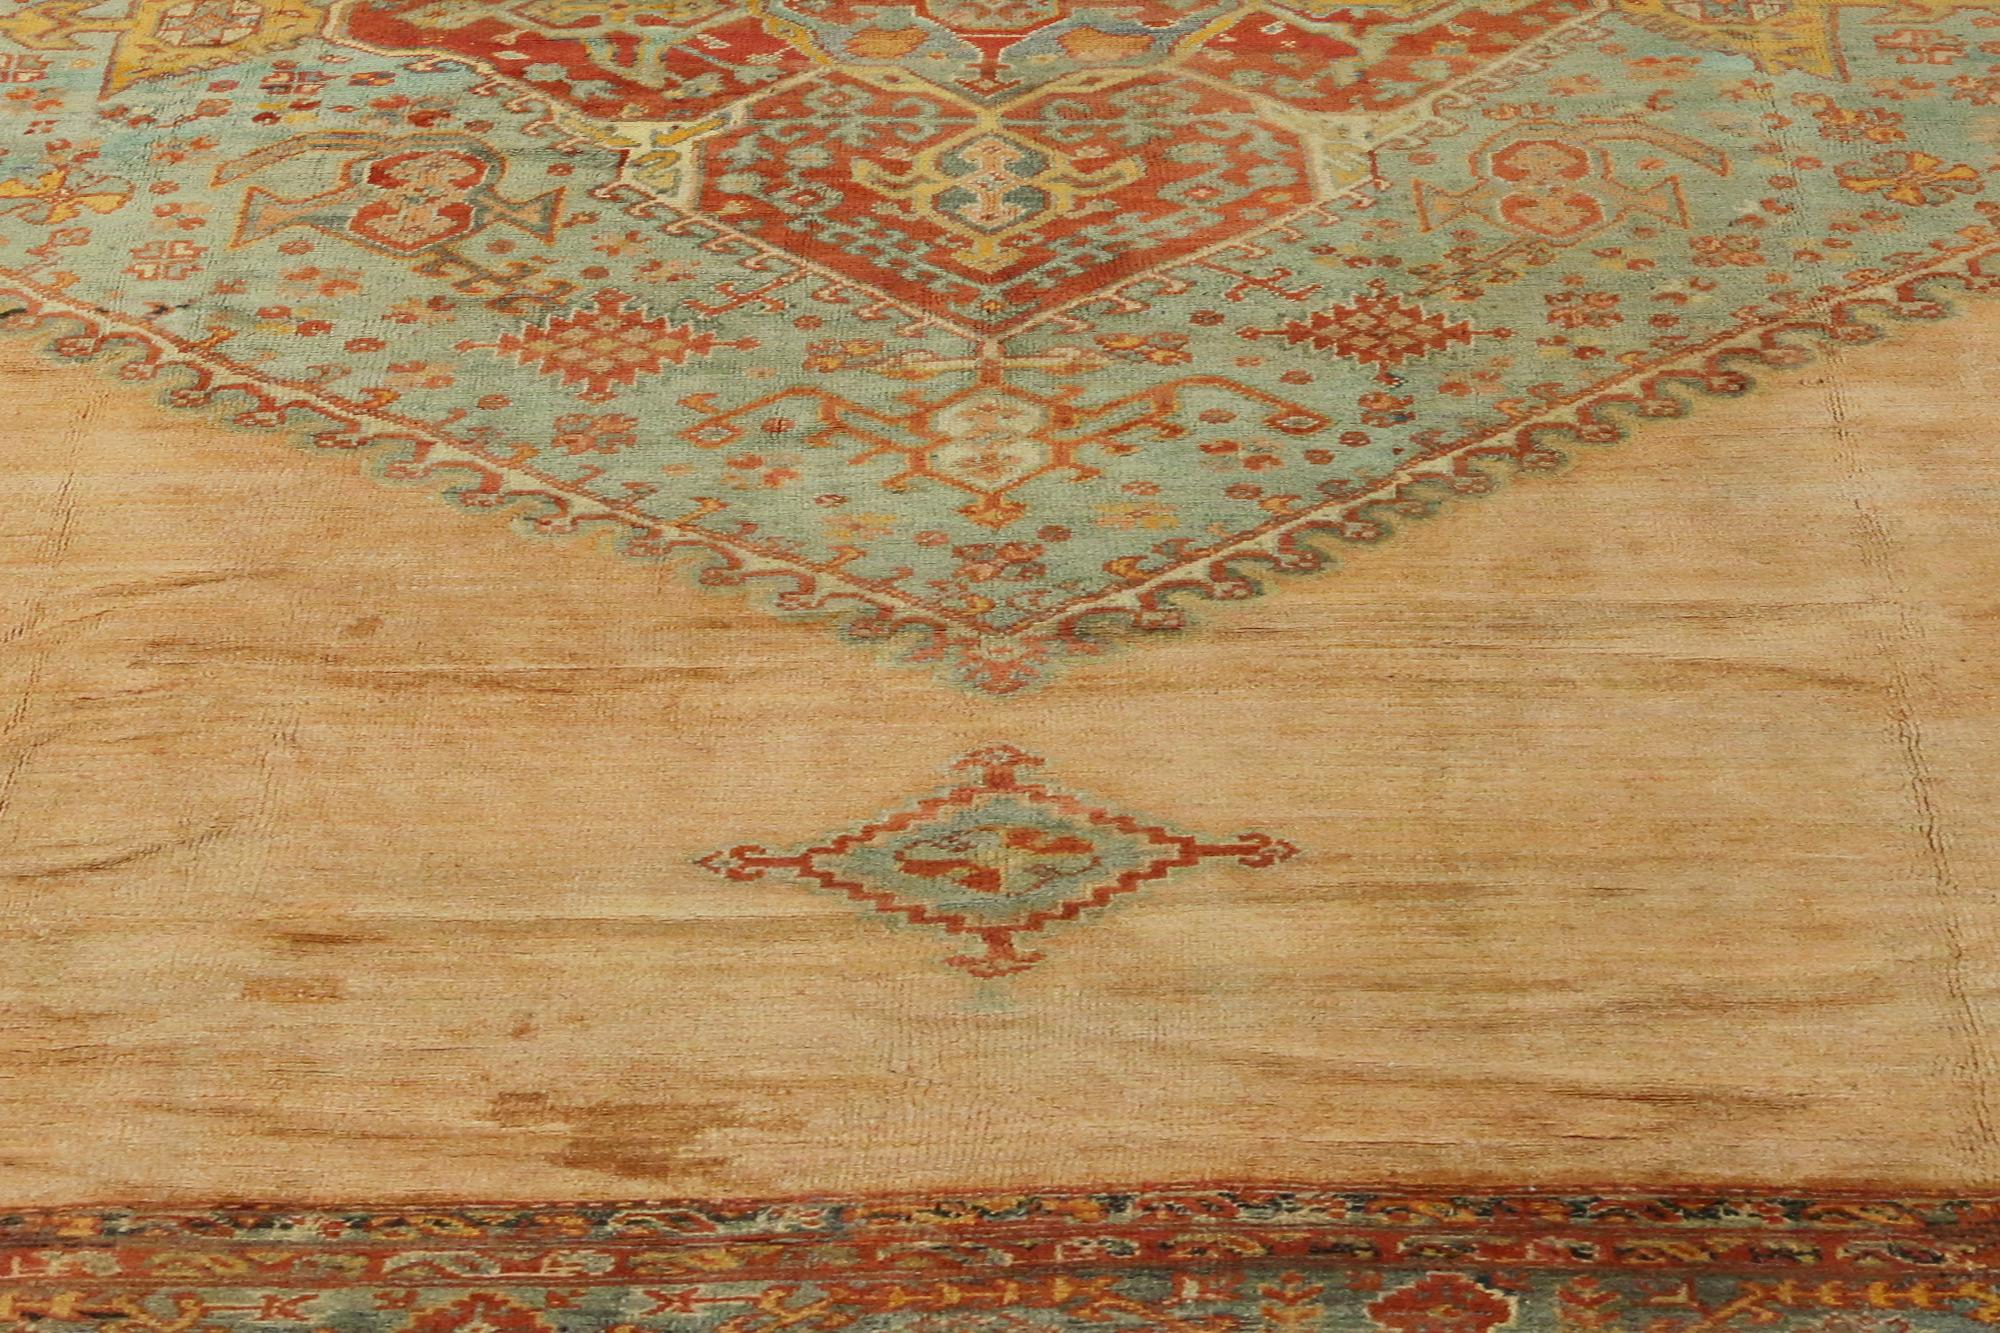 Oversized Antique Turkish Oushak Rug, Hotel Lobby Size Carpet In Good Condition For Sale In Dallas, TX